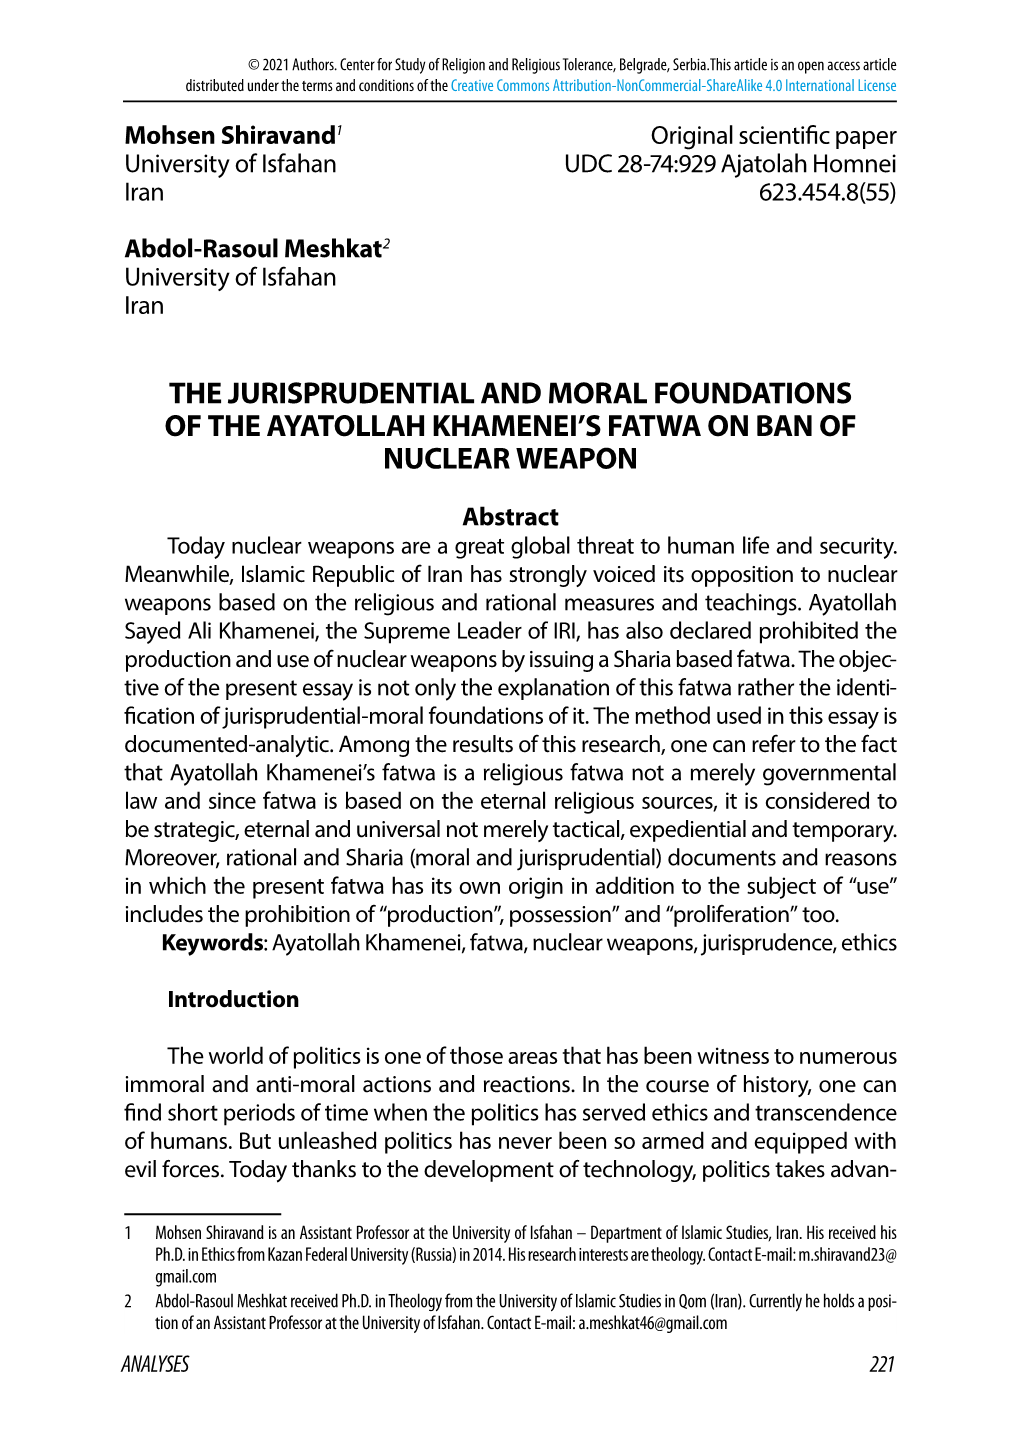 The Jurisprudential and Moral Foundations of the Ayatollah Khamenei’S Fatwa on Ban of Nuclear Weapon